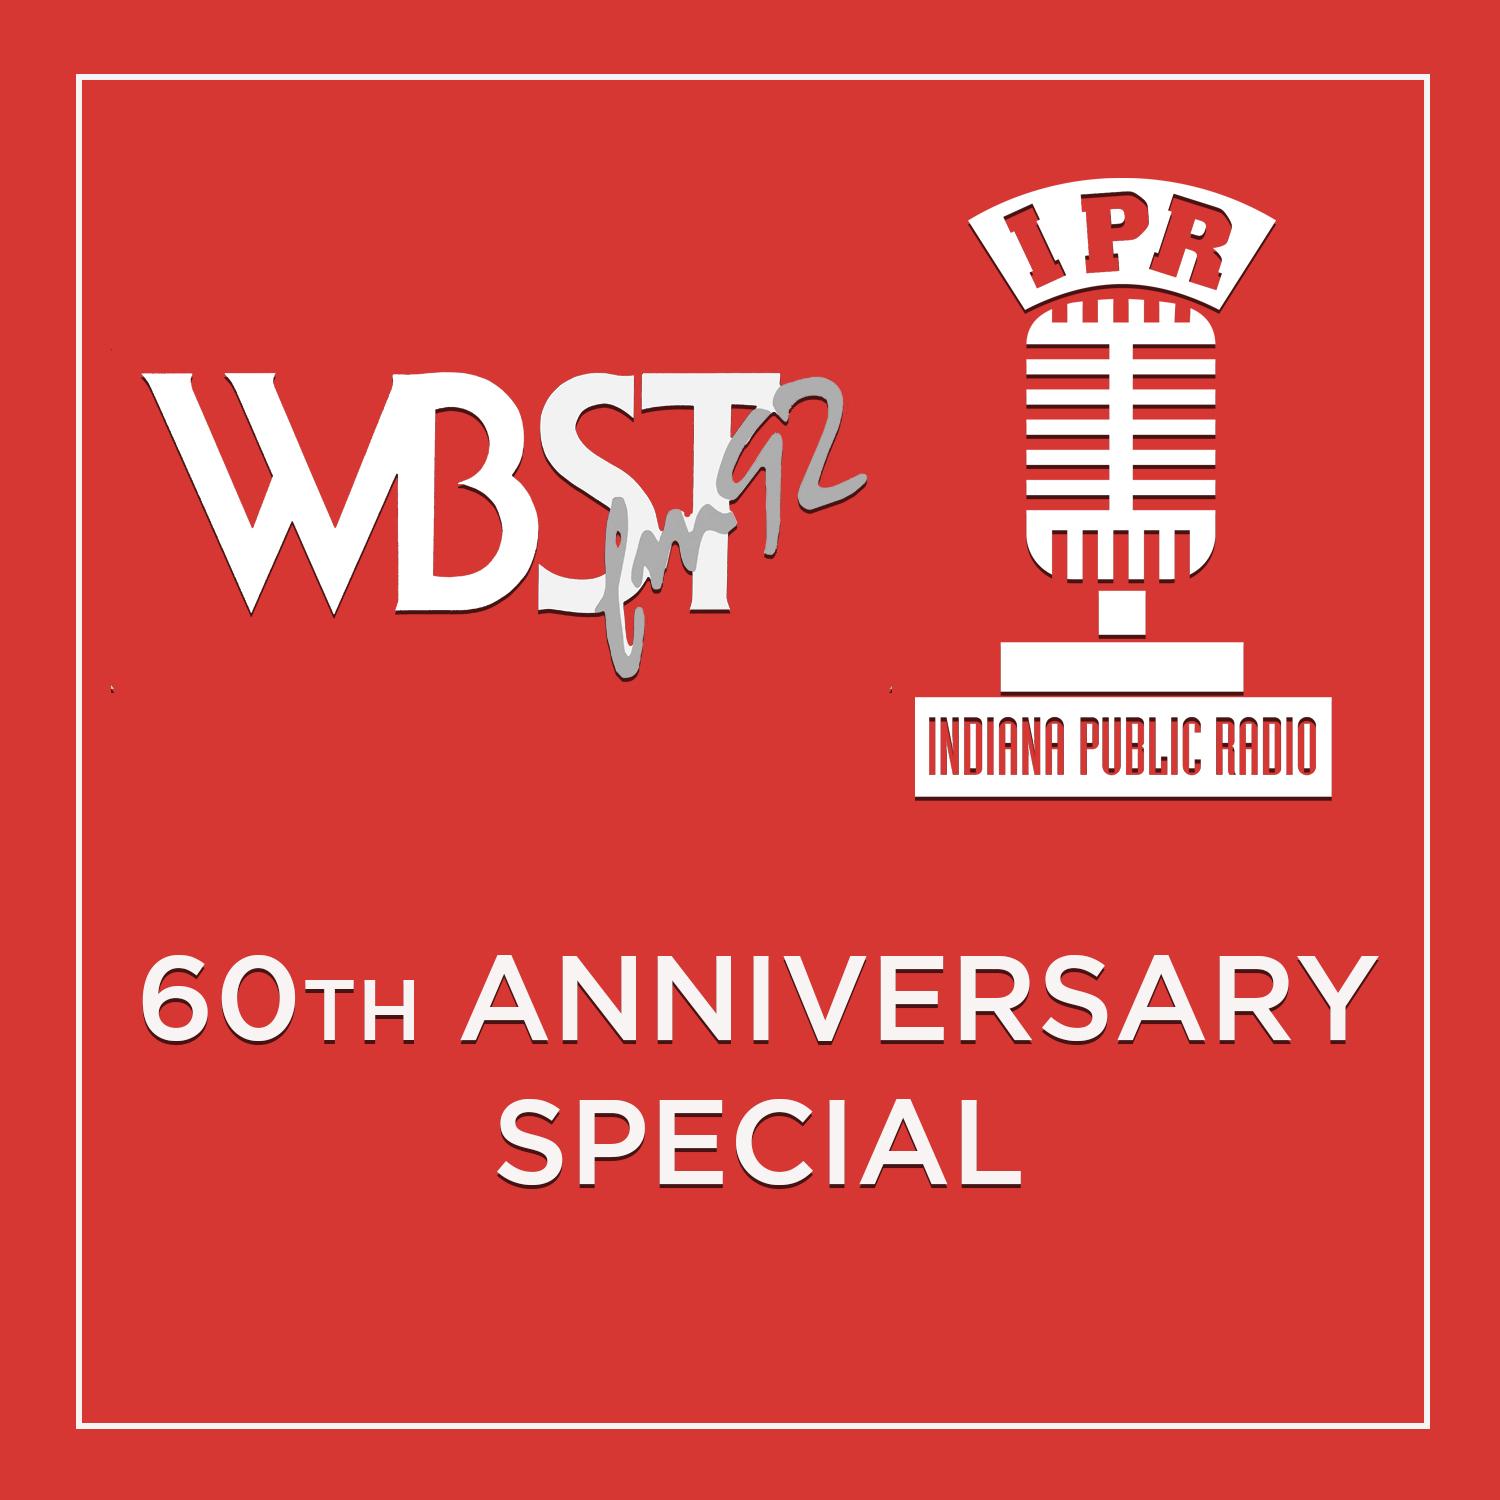 Thumbnail for "Presenting the WBST 60th Anniversary Special".